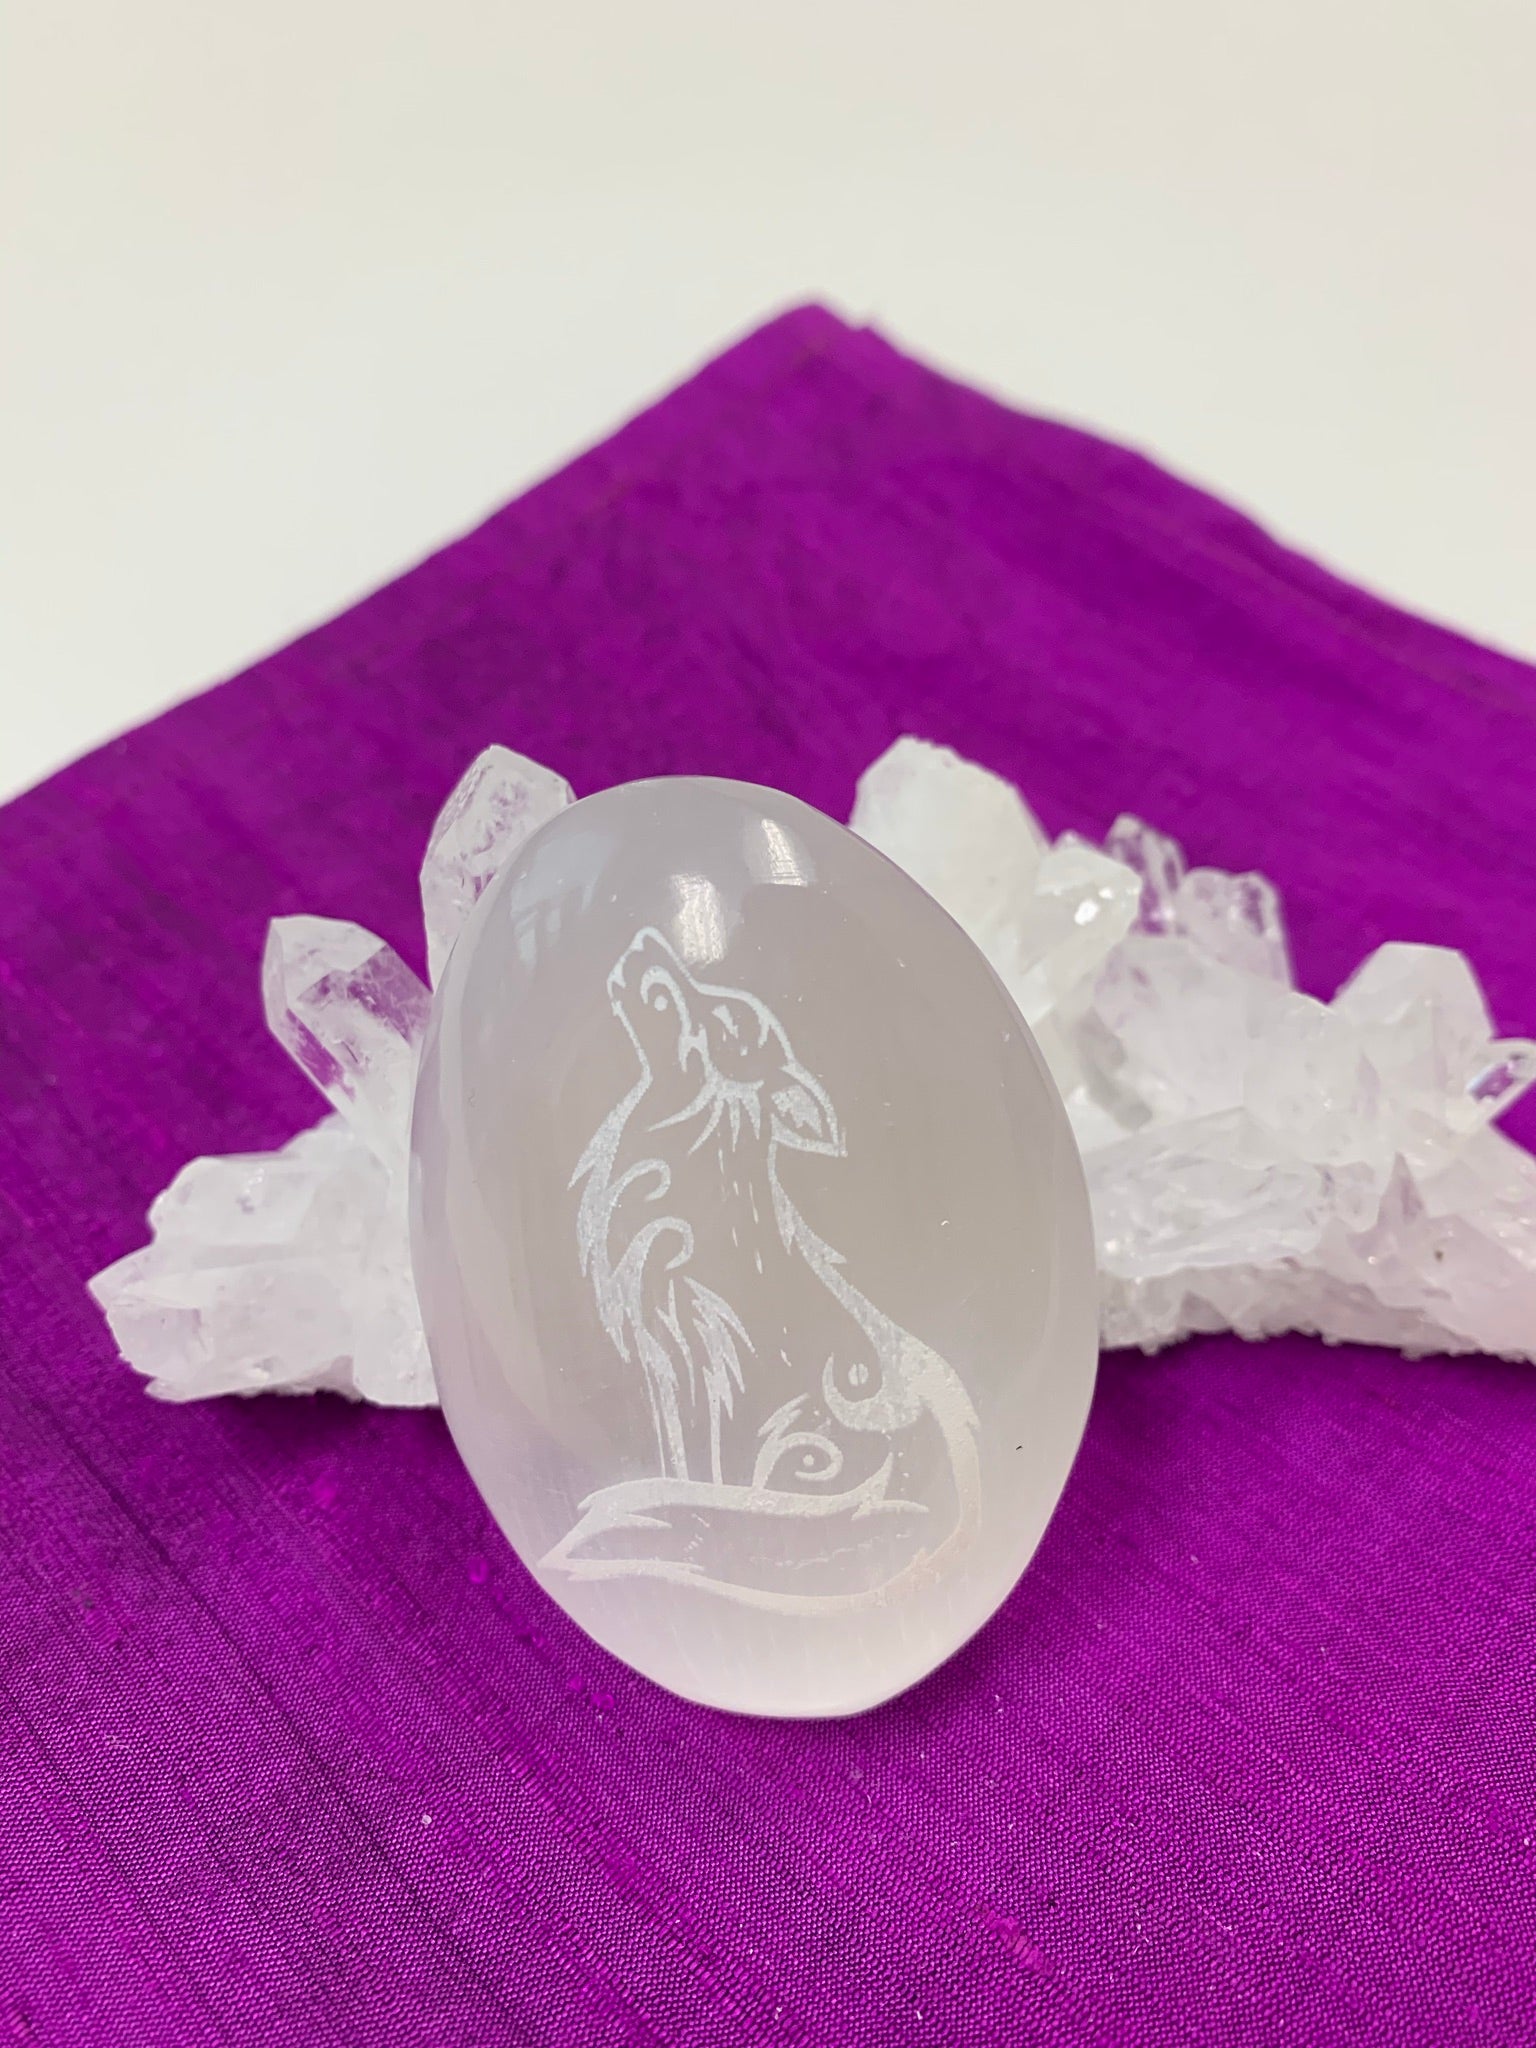 Wolf etched on smooth, polished white selenite palm stone. The selenite ranges from translucent to milky white in color. Wolf is intuitive, the teacher bringing knowledge back to the pack, is loyal and family oriented but also has an individualistic instinct. The weight of each stone varies, but the average is 4.2 oz and the size is approximately 3"x2.5".  These selenite stones are handcrafted and etched with lasers and by hand. This selenite is sourced ethically and workers are paid living wages. 